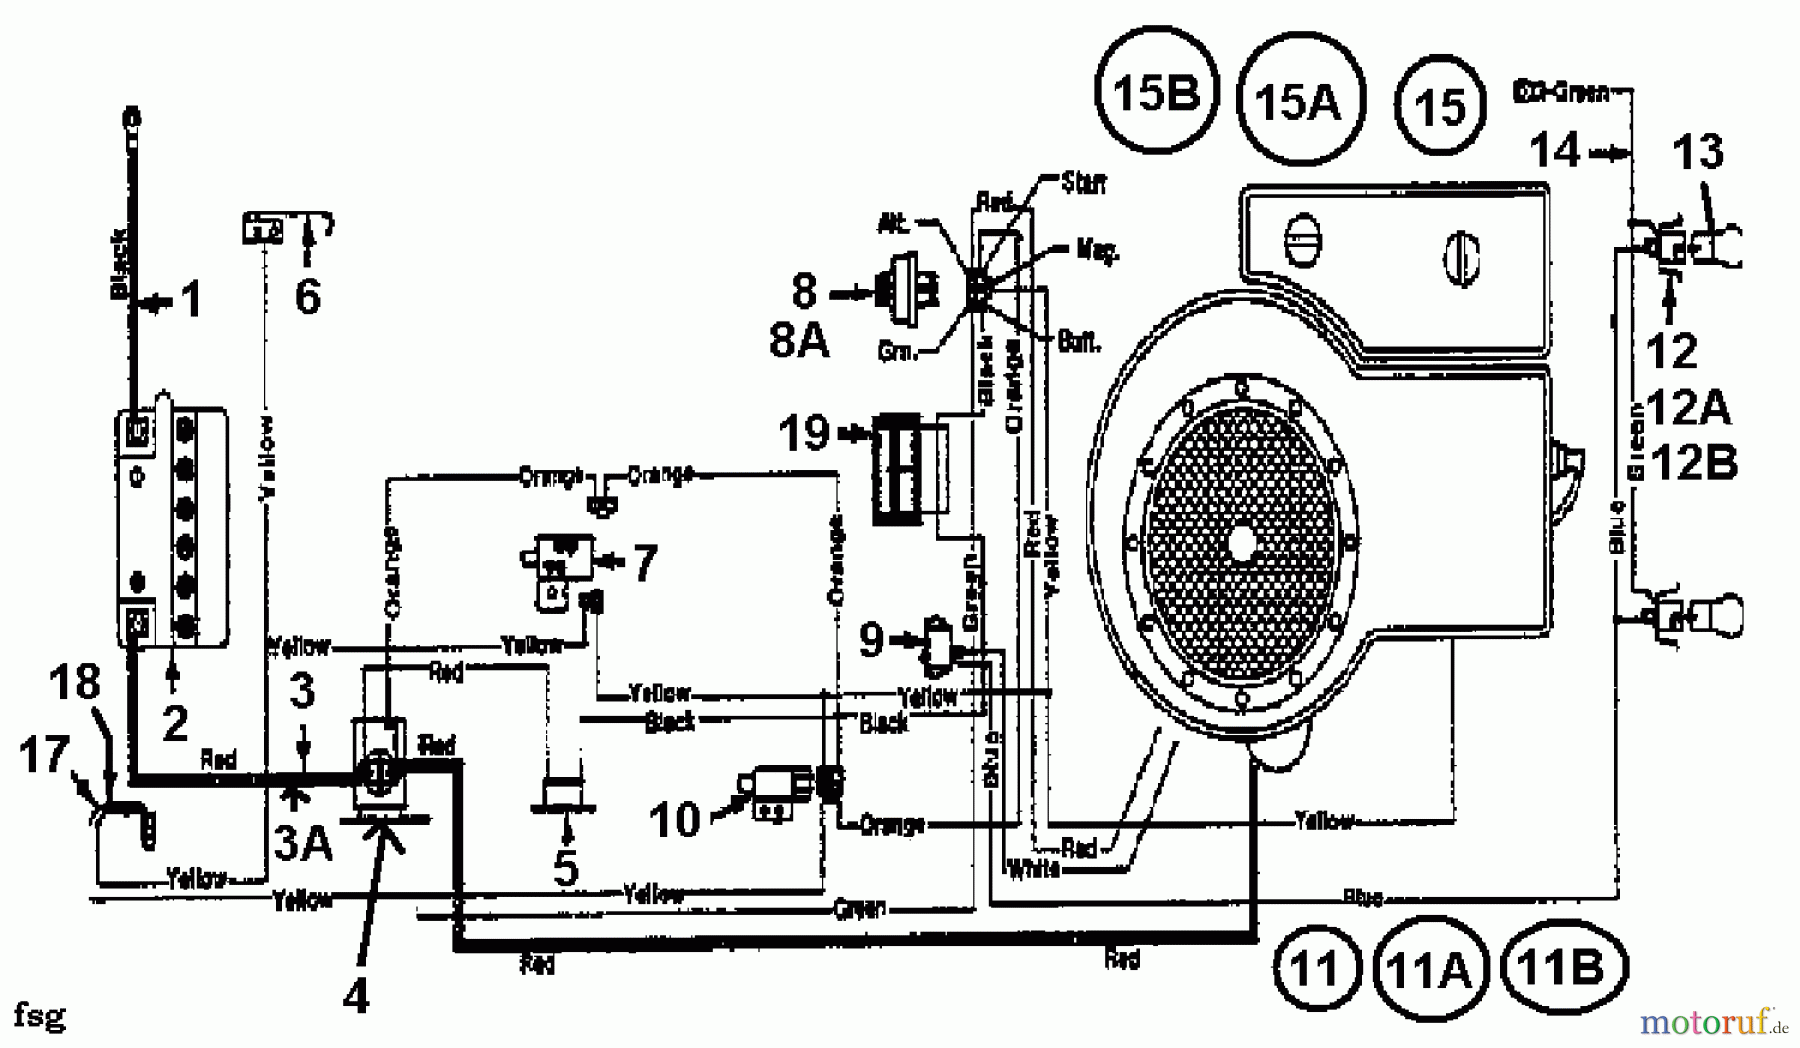  Columbia Lawn tractors 111/910 N 132-430E600  (1992) Wiring diagram single cylinder